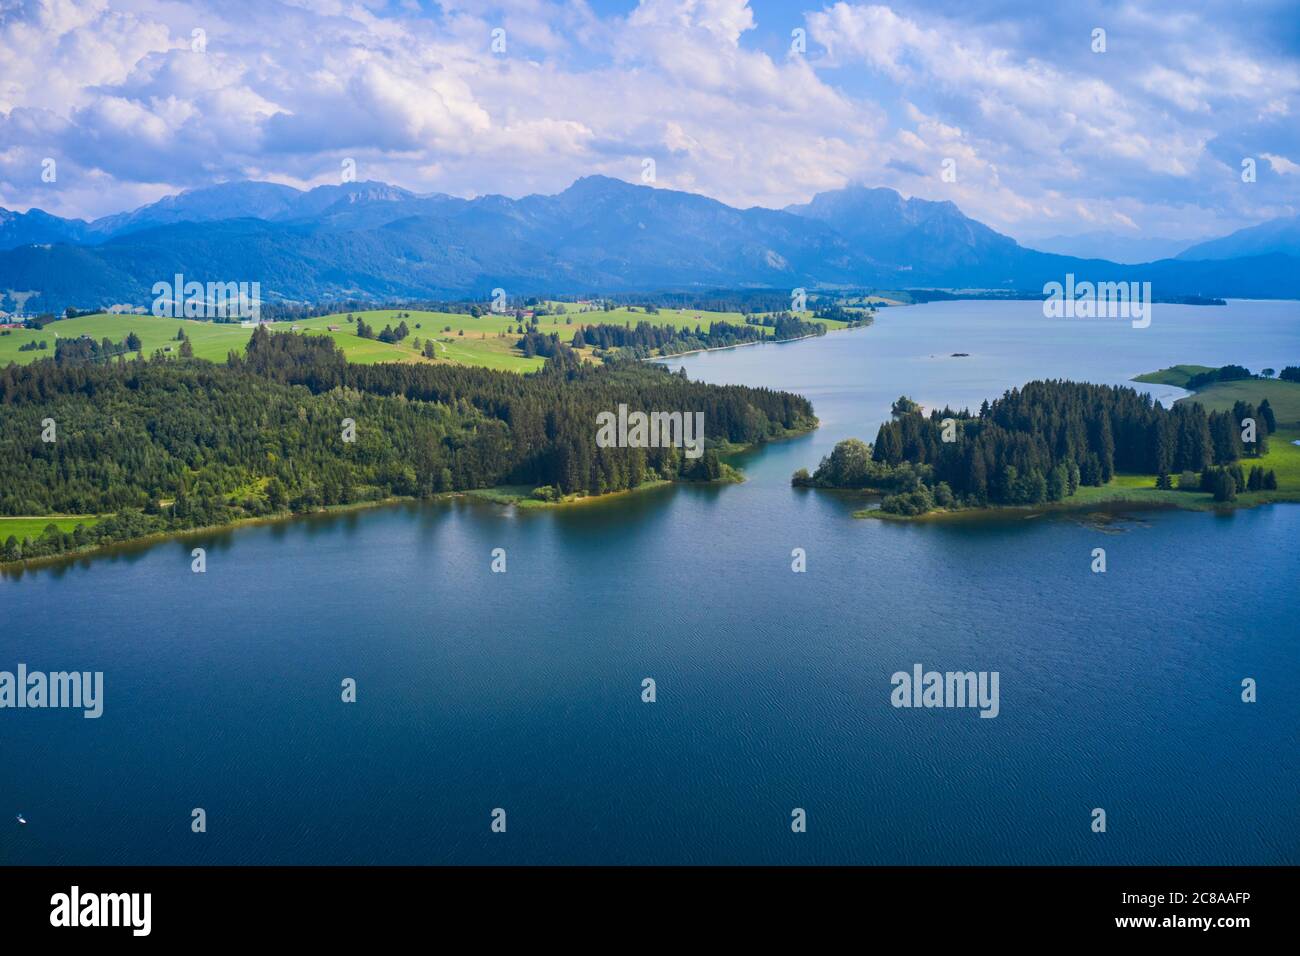 Fuessen, Germany, July 22, 2020.  Tourists swimming and relaxing at lake Illasbergsee near Forggensee  © Peter Schatz / Alamy Live News Stock Photo